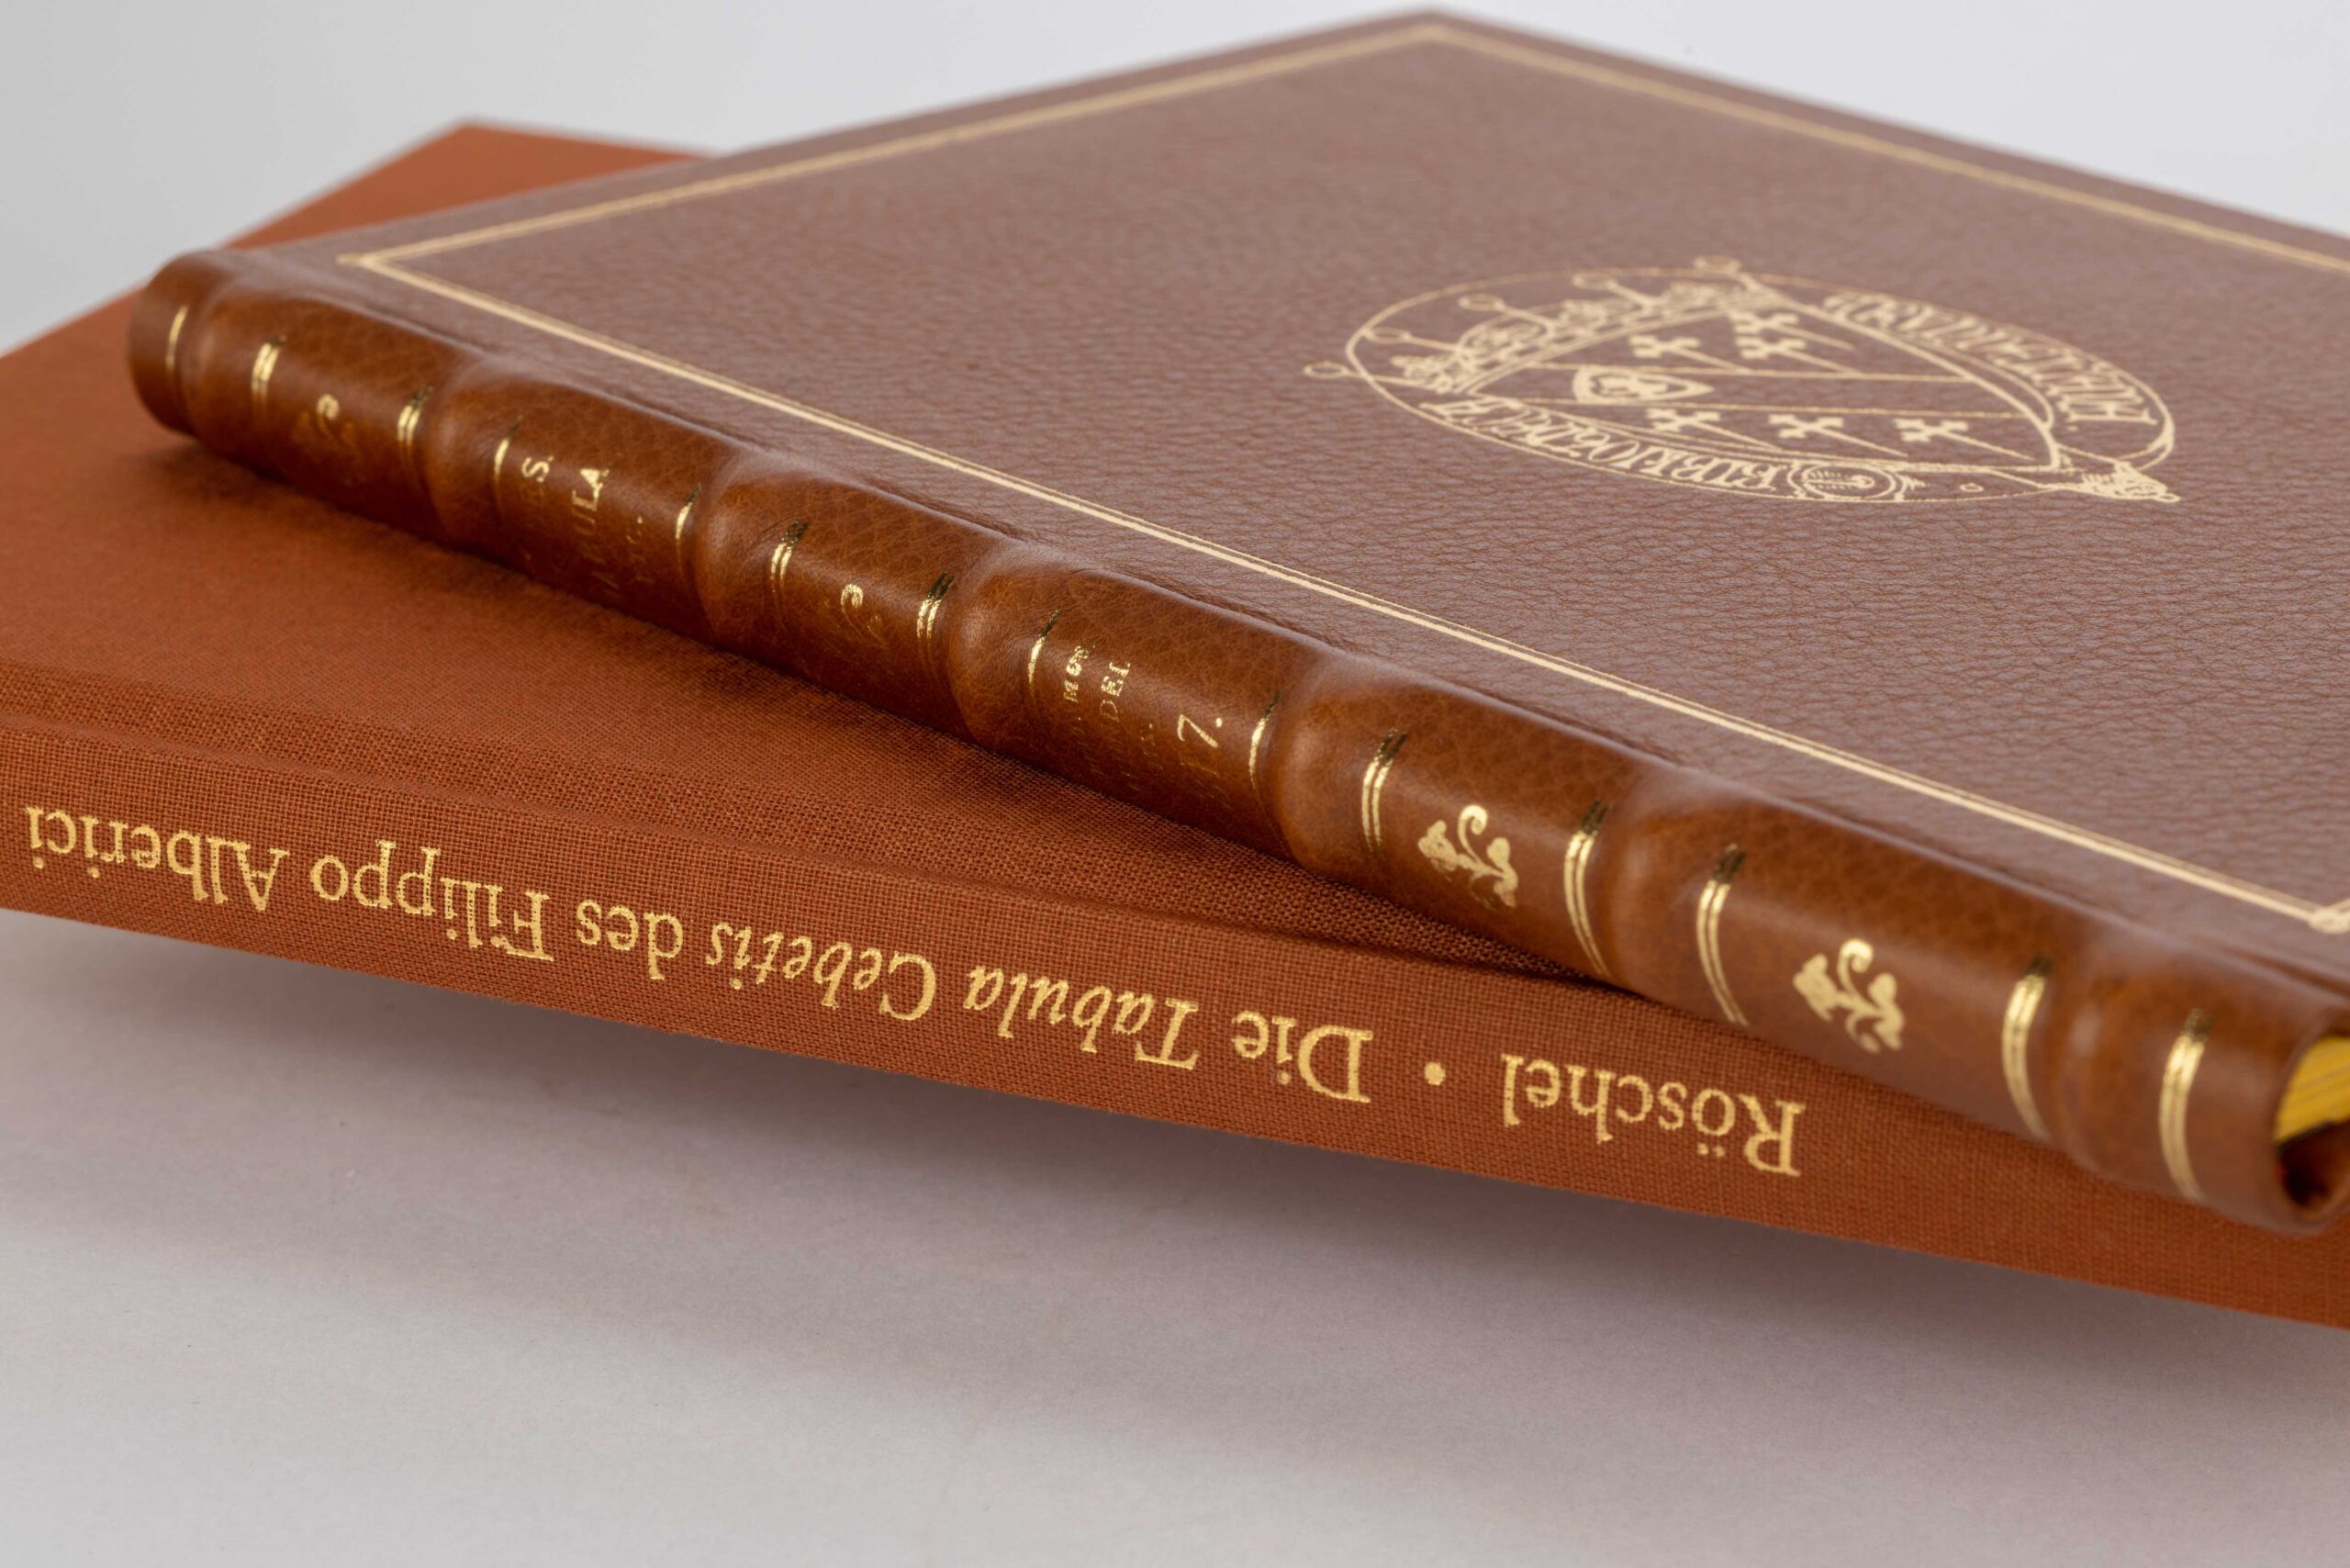 The facsimile edition of the Tabula Cebetis lies on the commentary volume of the same work.